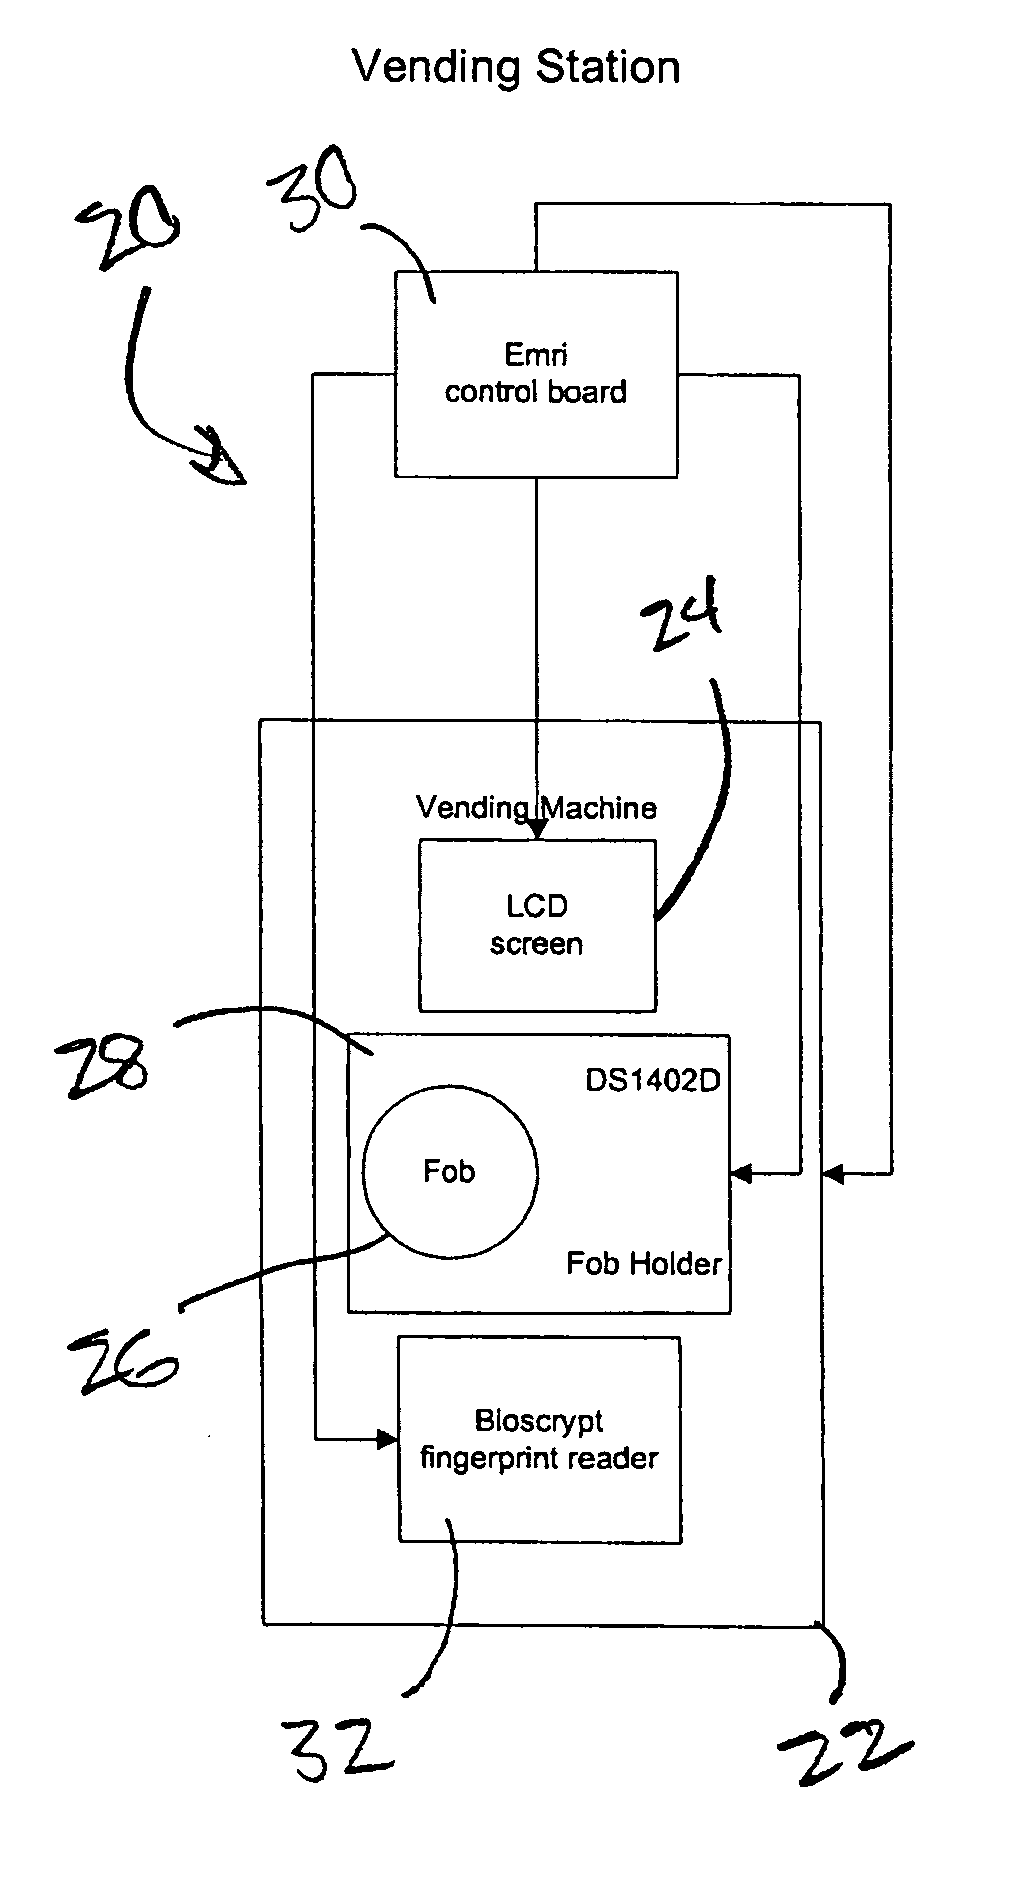 Authentication method and system for use in vending a restricted product or service